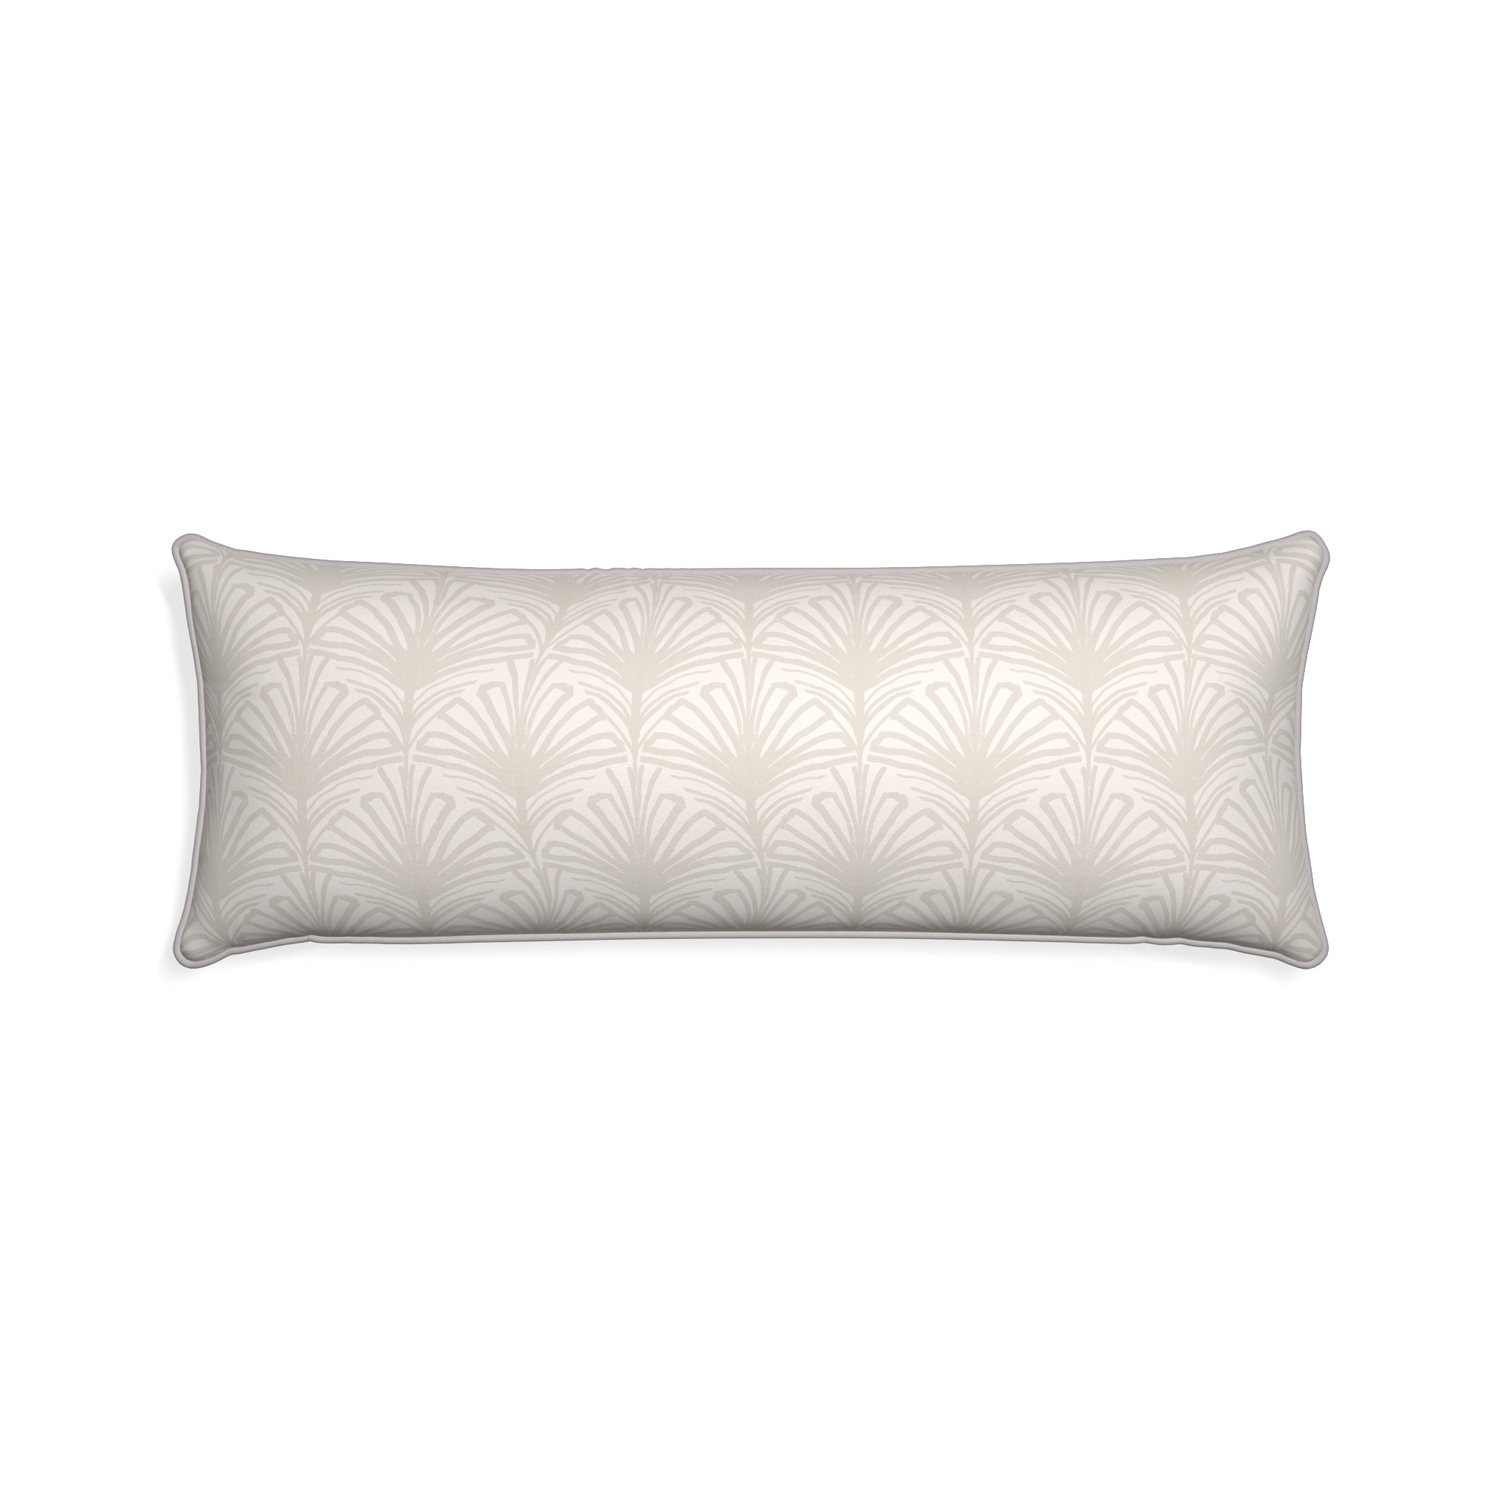 Xl-lumbar suzy sand custom beige palmpillow with pebble piping on white background